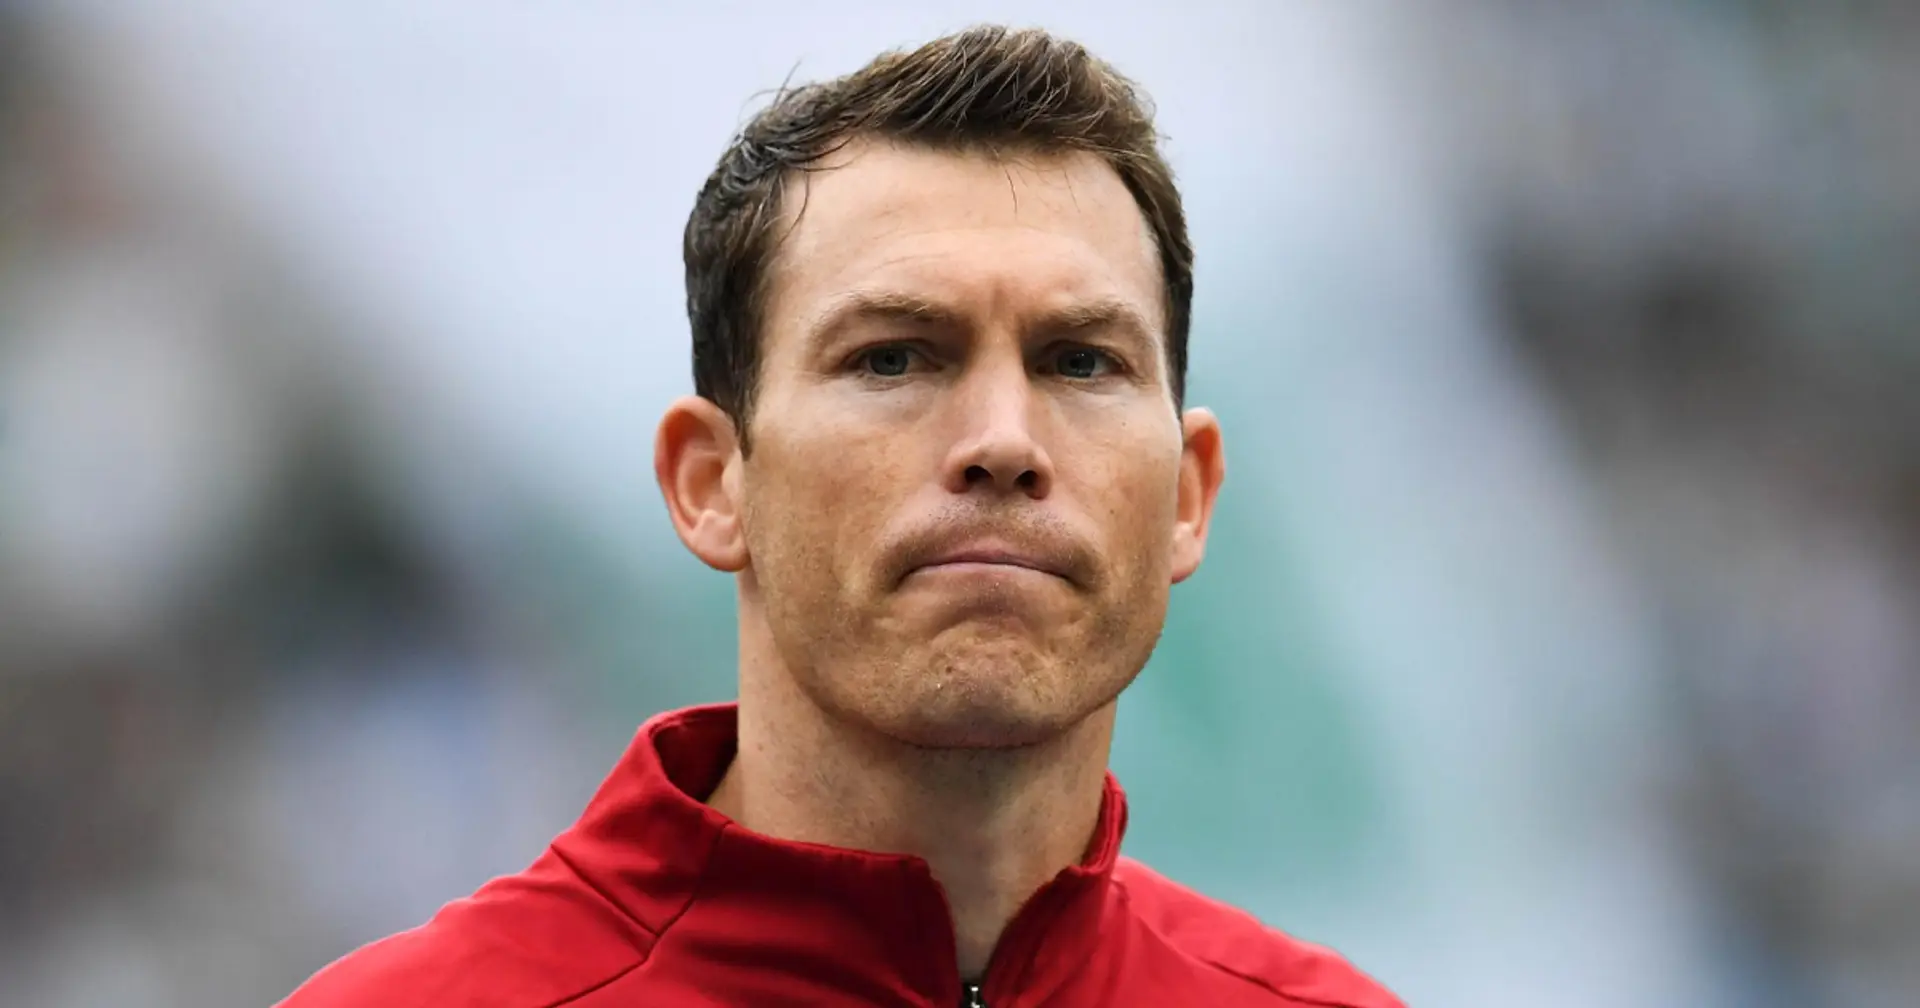 Stephan Lichtsteiner announces retirement from football aged 36